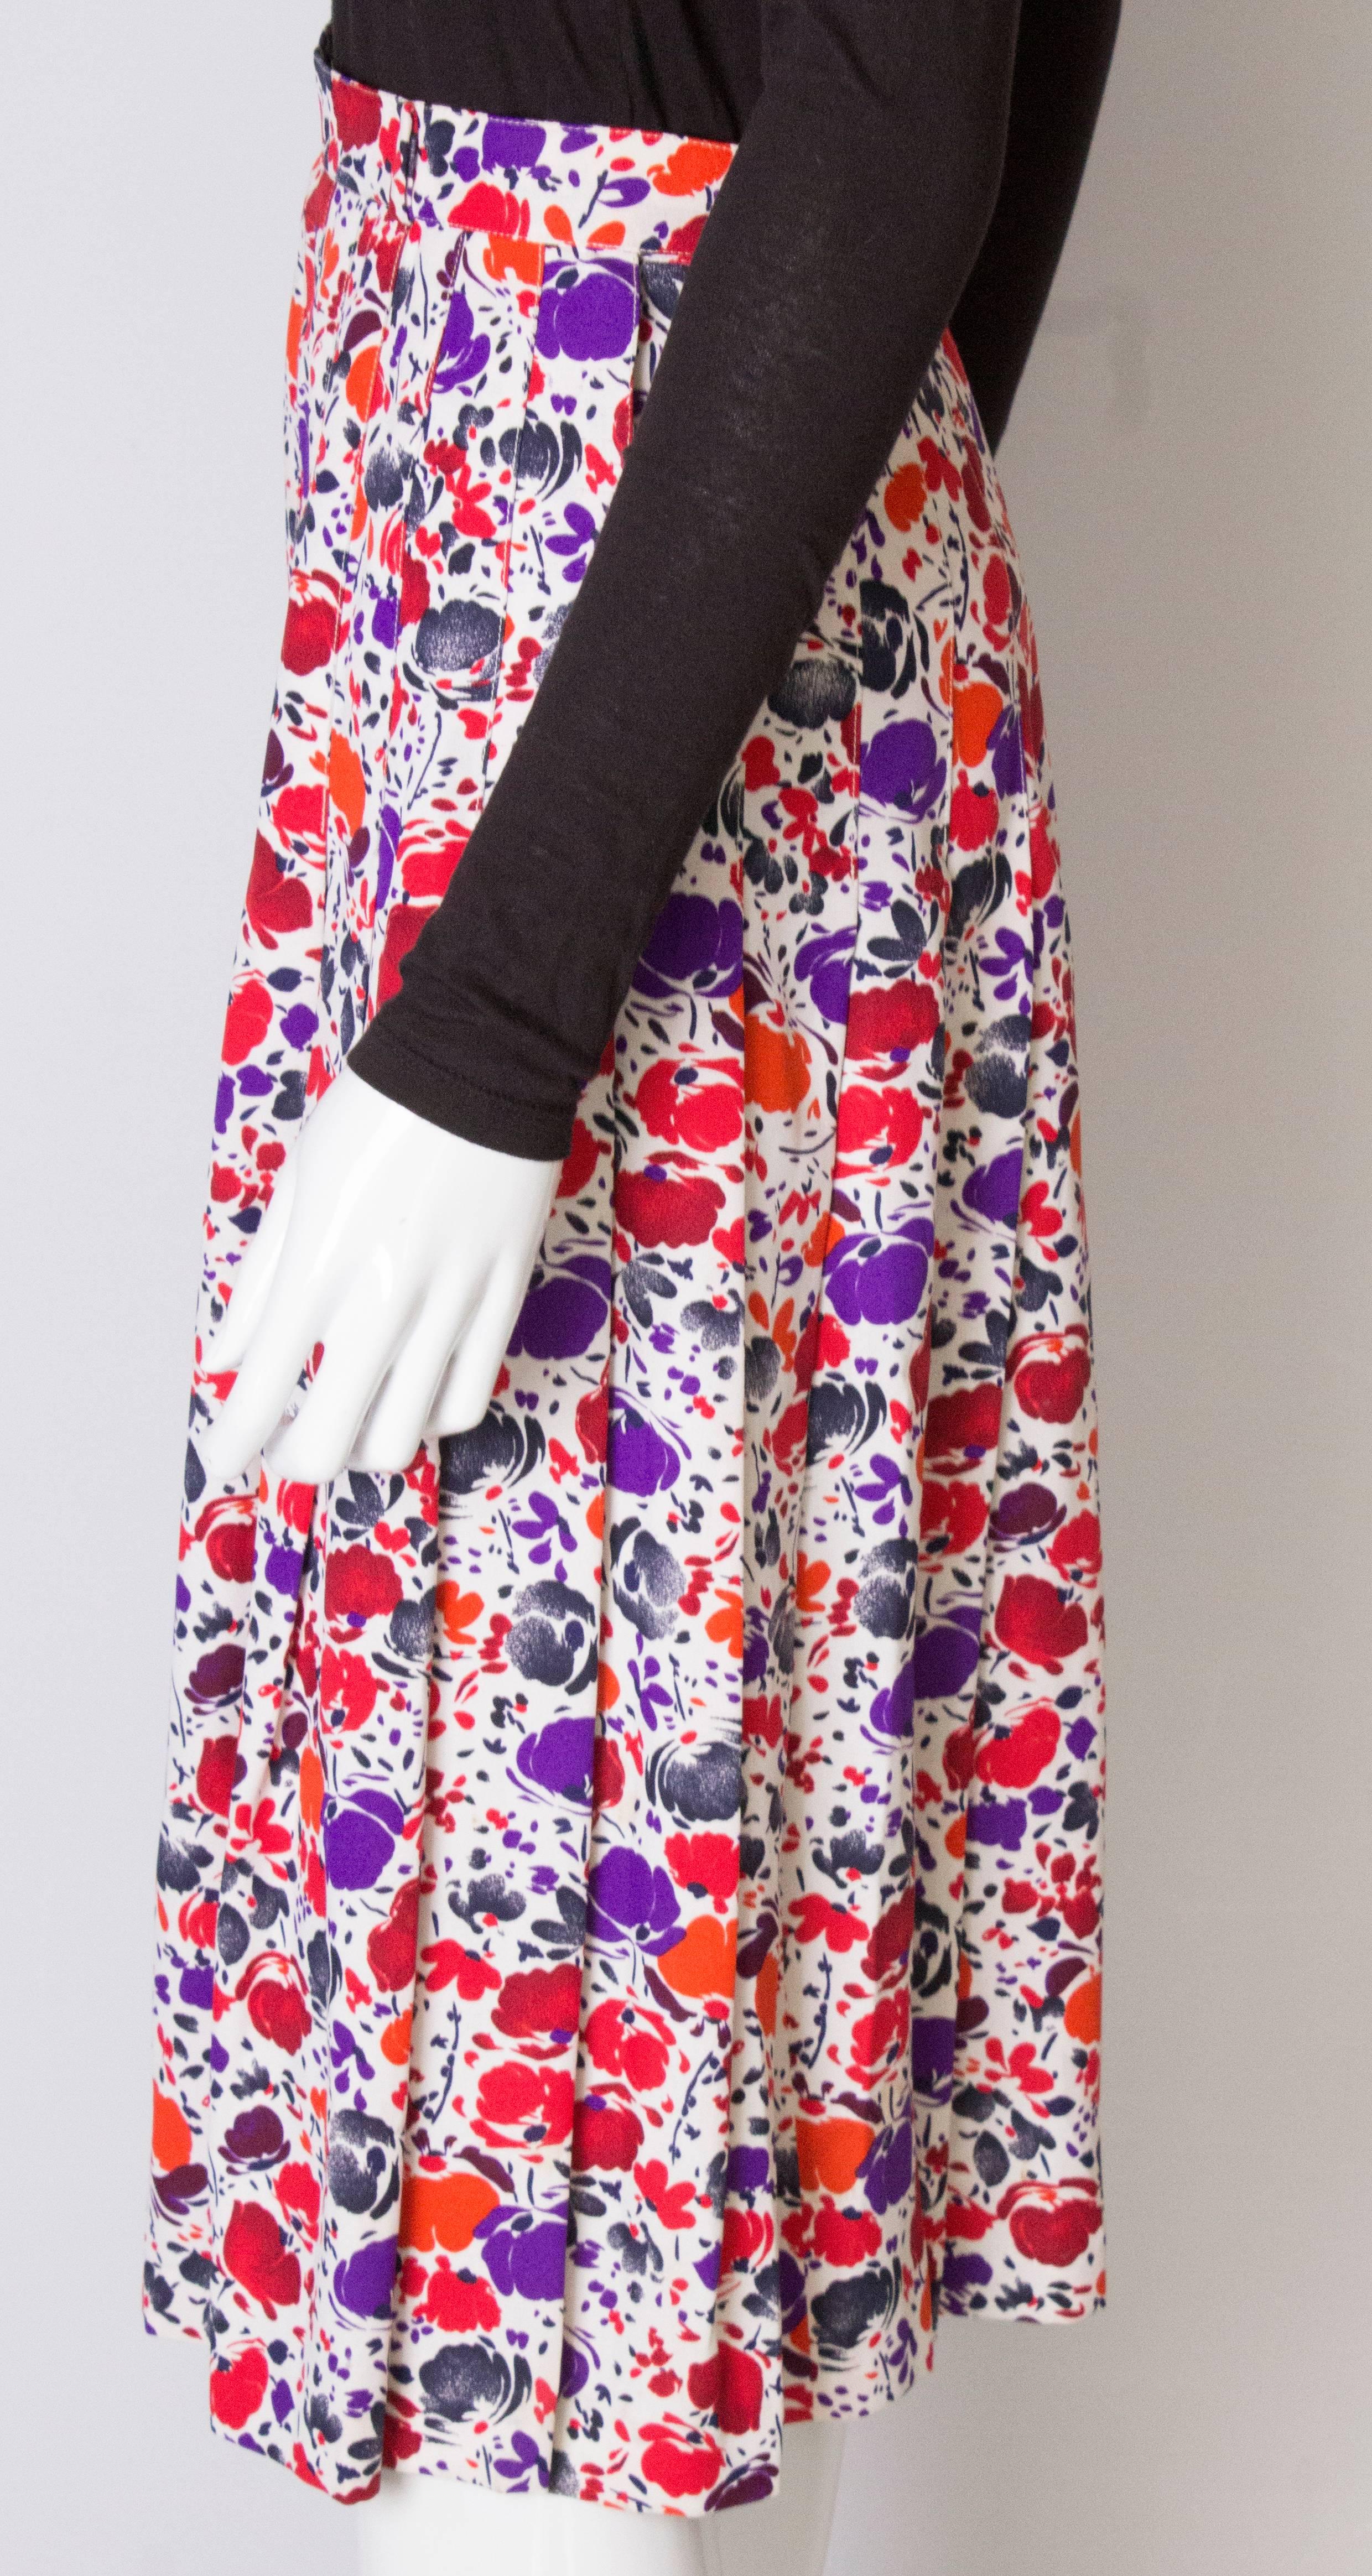 A vintage 1980s floral printed pleated numbered Skirt by Jean Louis Scherer 1